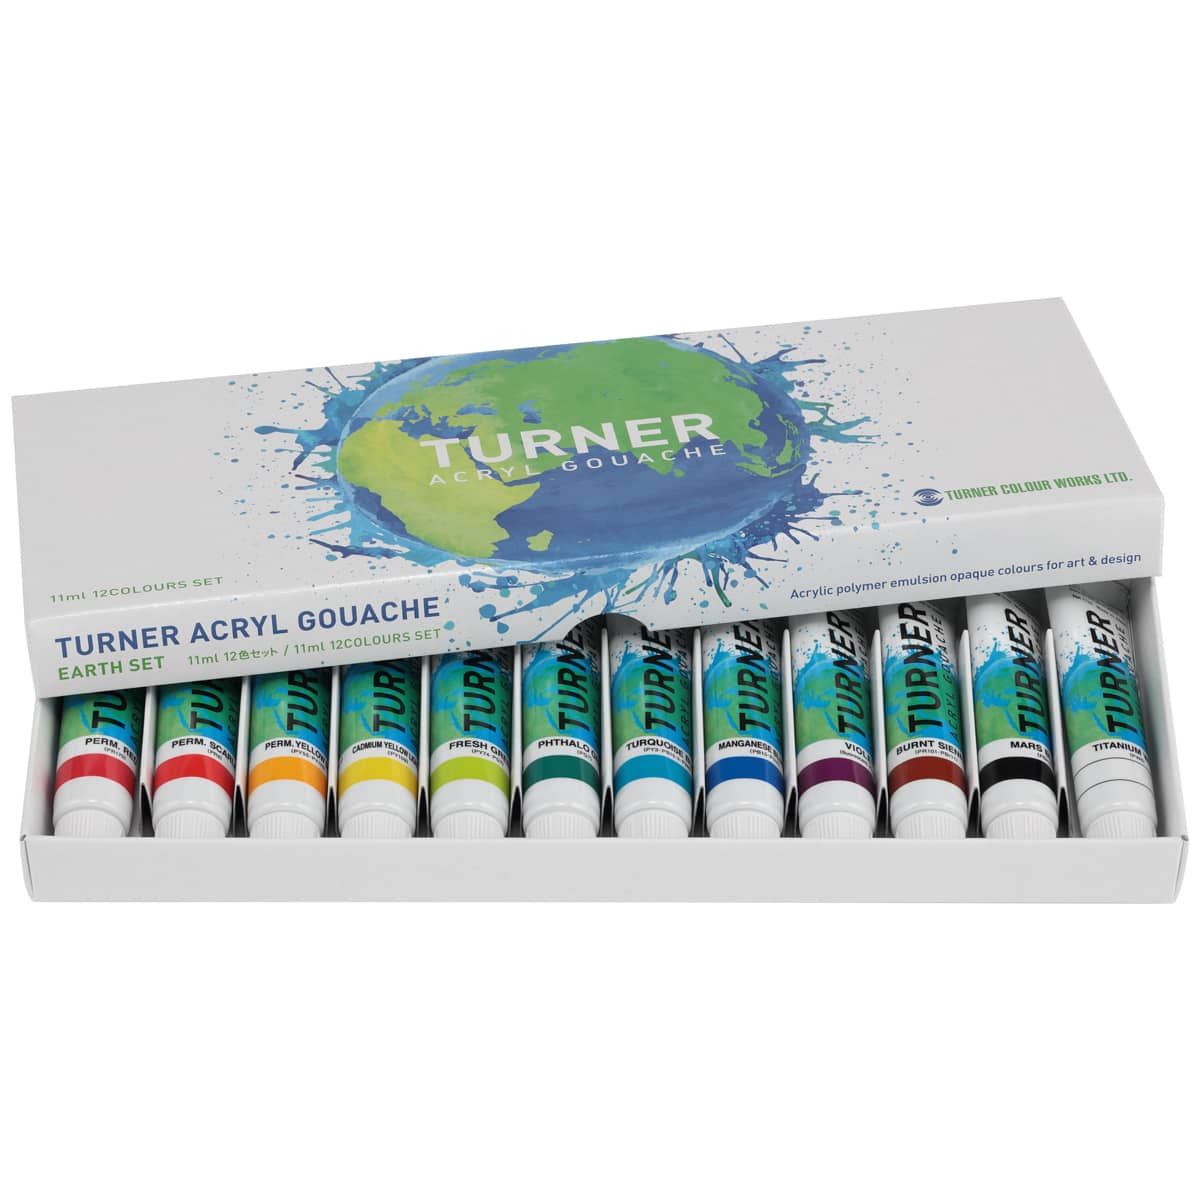 Turner acrylic gouache 12 color set school by Turner color